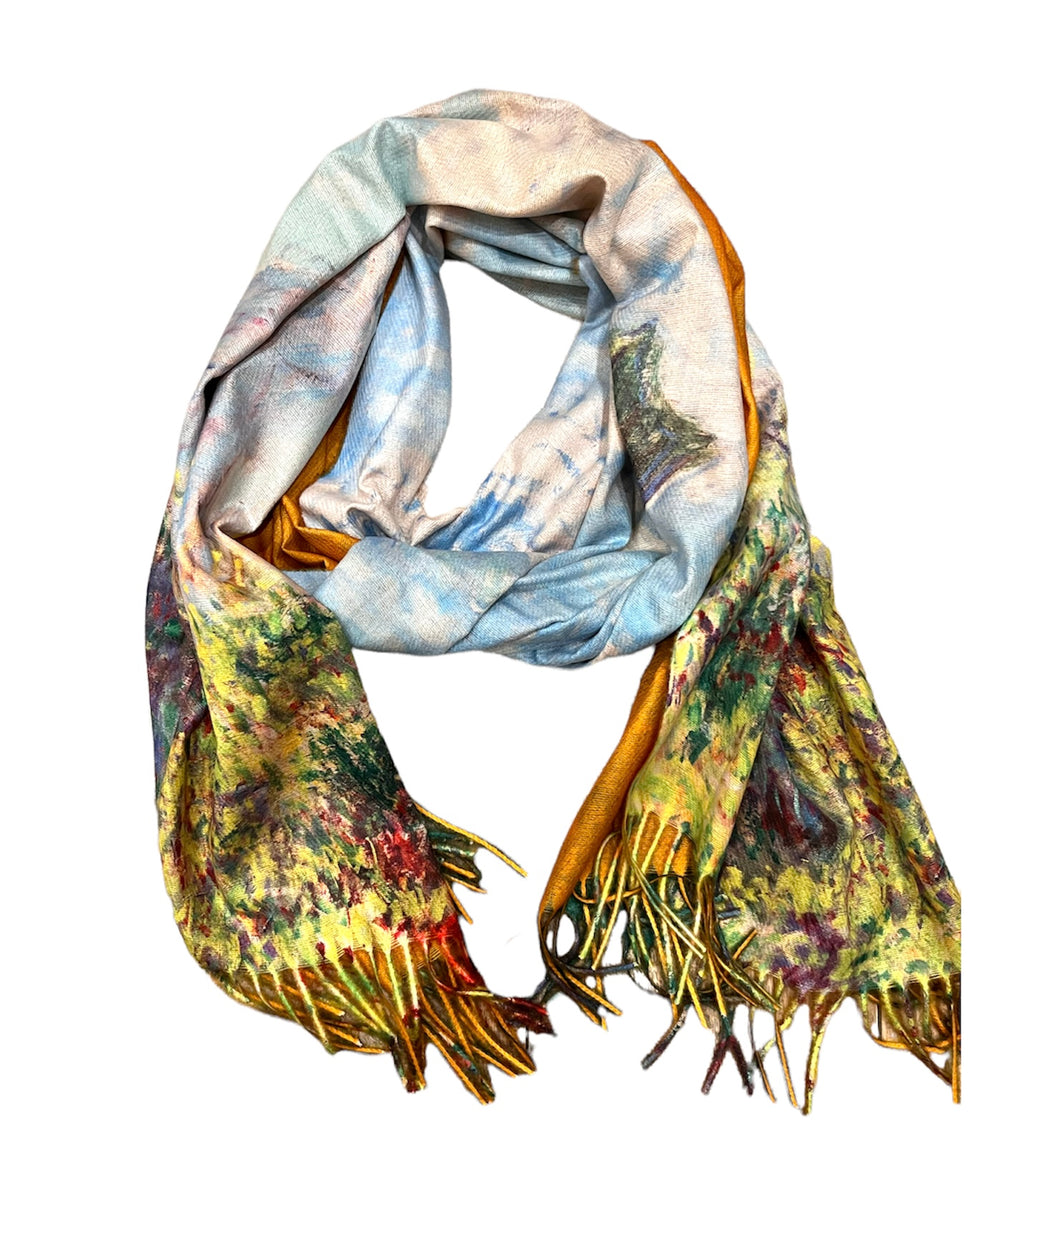 Cashmere luxurious art scarf lady with umbrella